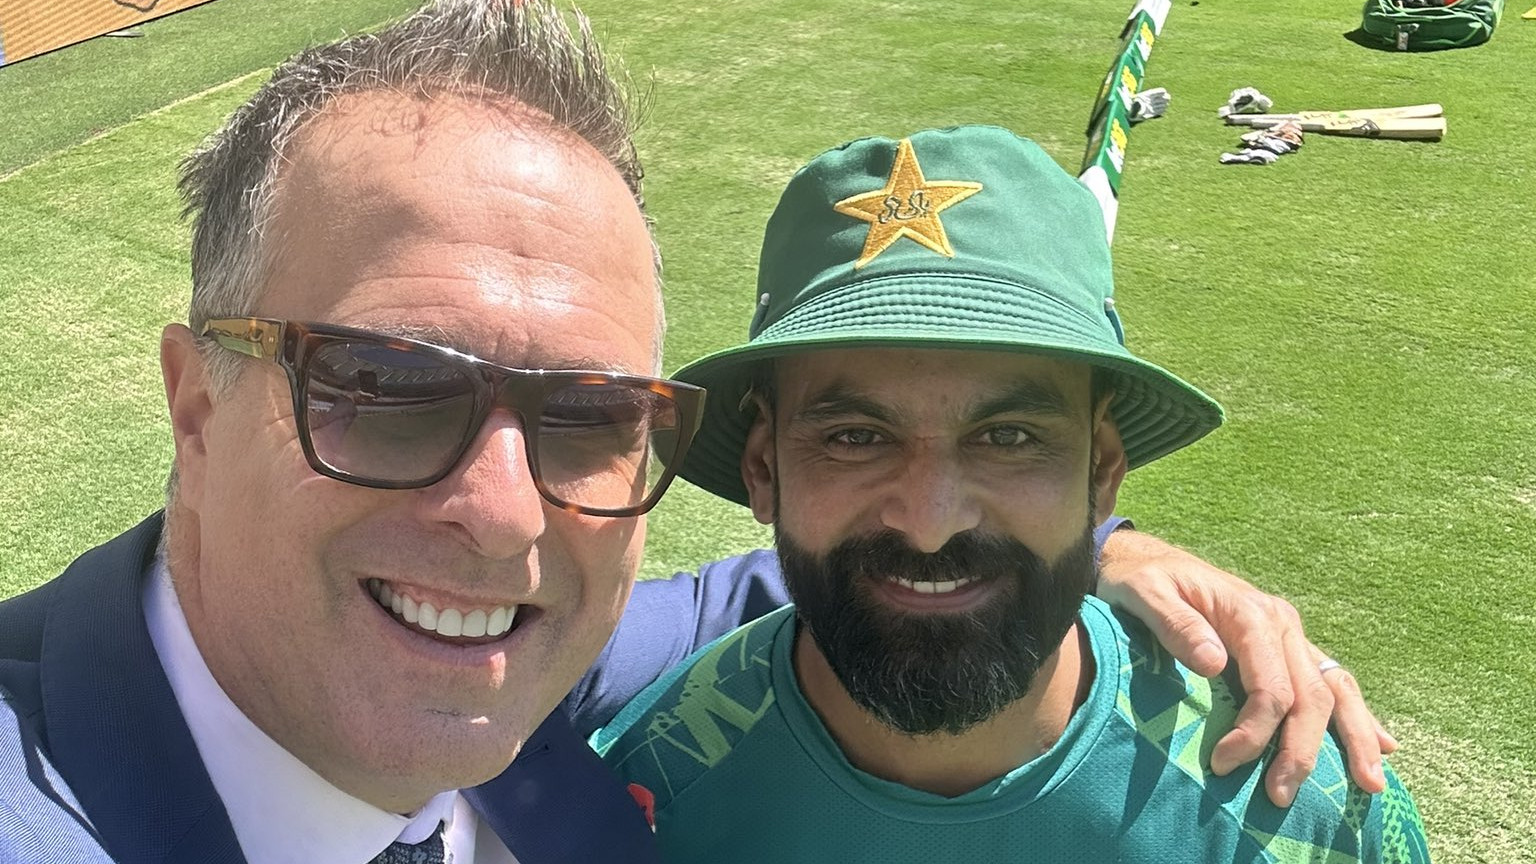 Michael Vaughan clicks a friendly selfie with Mohammad Hafeez weeks after social media spat